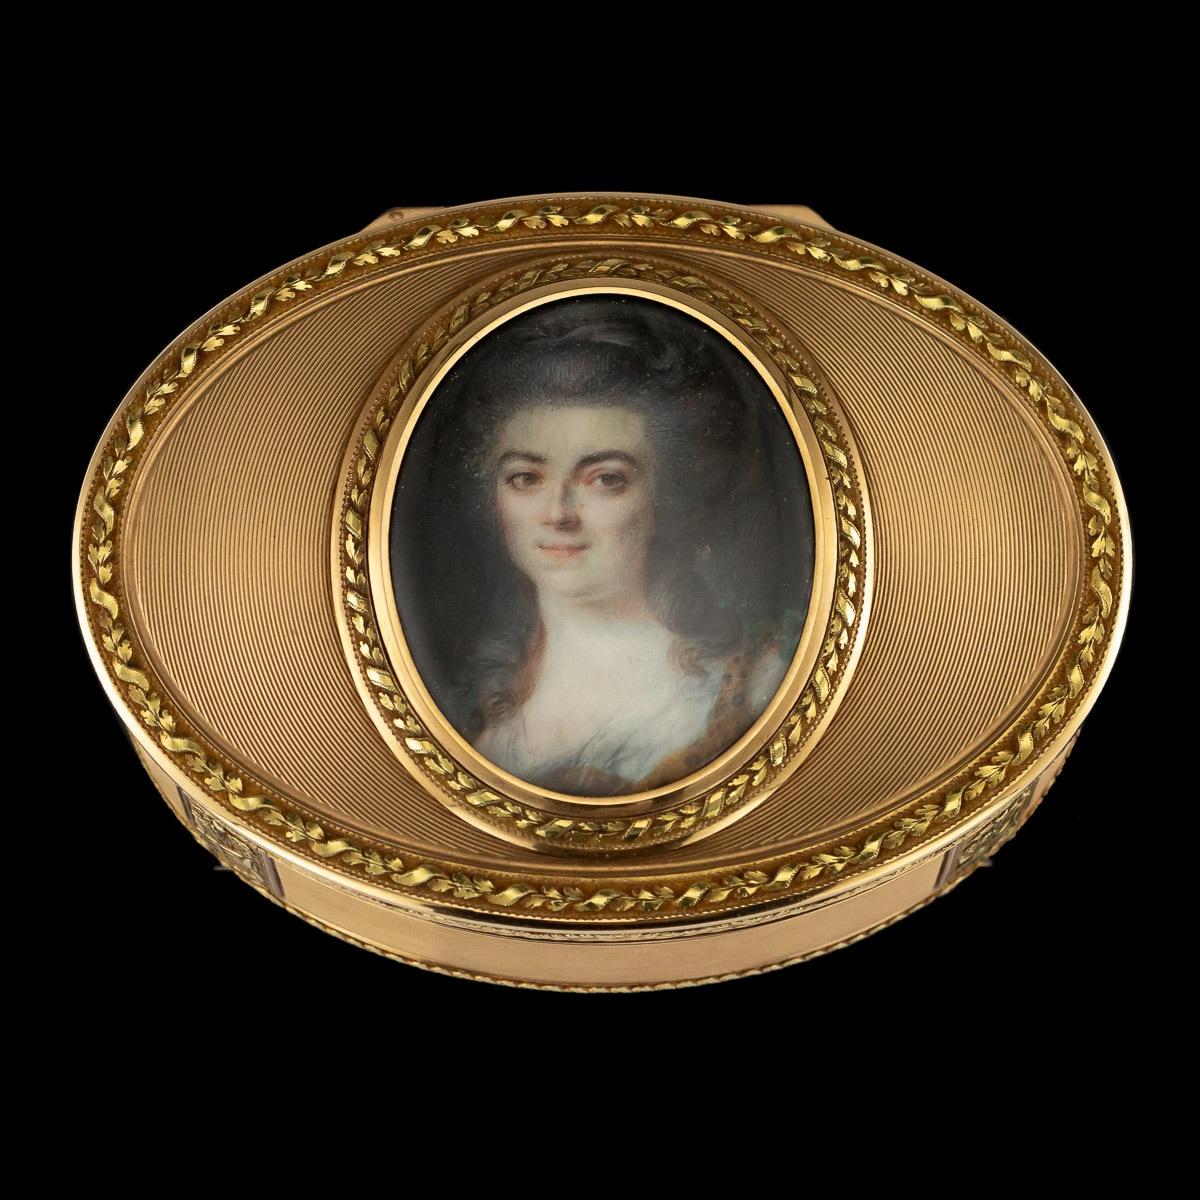 Antique late-18th century German magnificent 18-karat gold snuff box, large and of oval form, within a laurel and ribbon frame on a linear engine-turned ground with laurel and ribbon border, the sides decorated with festoons and bead band on sable